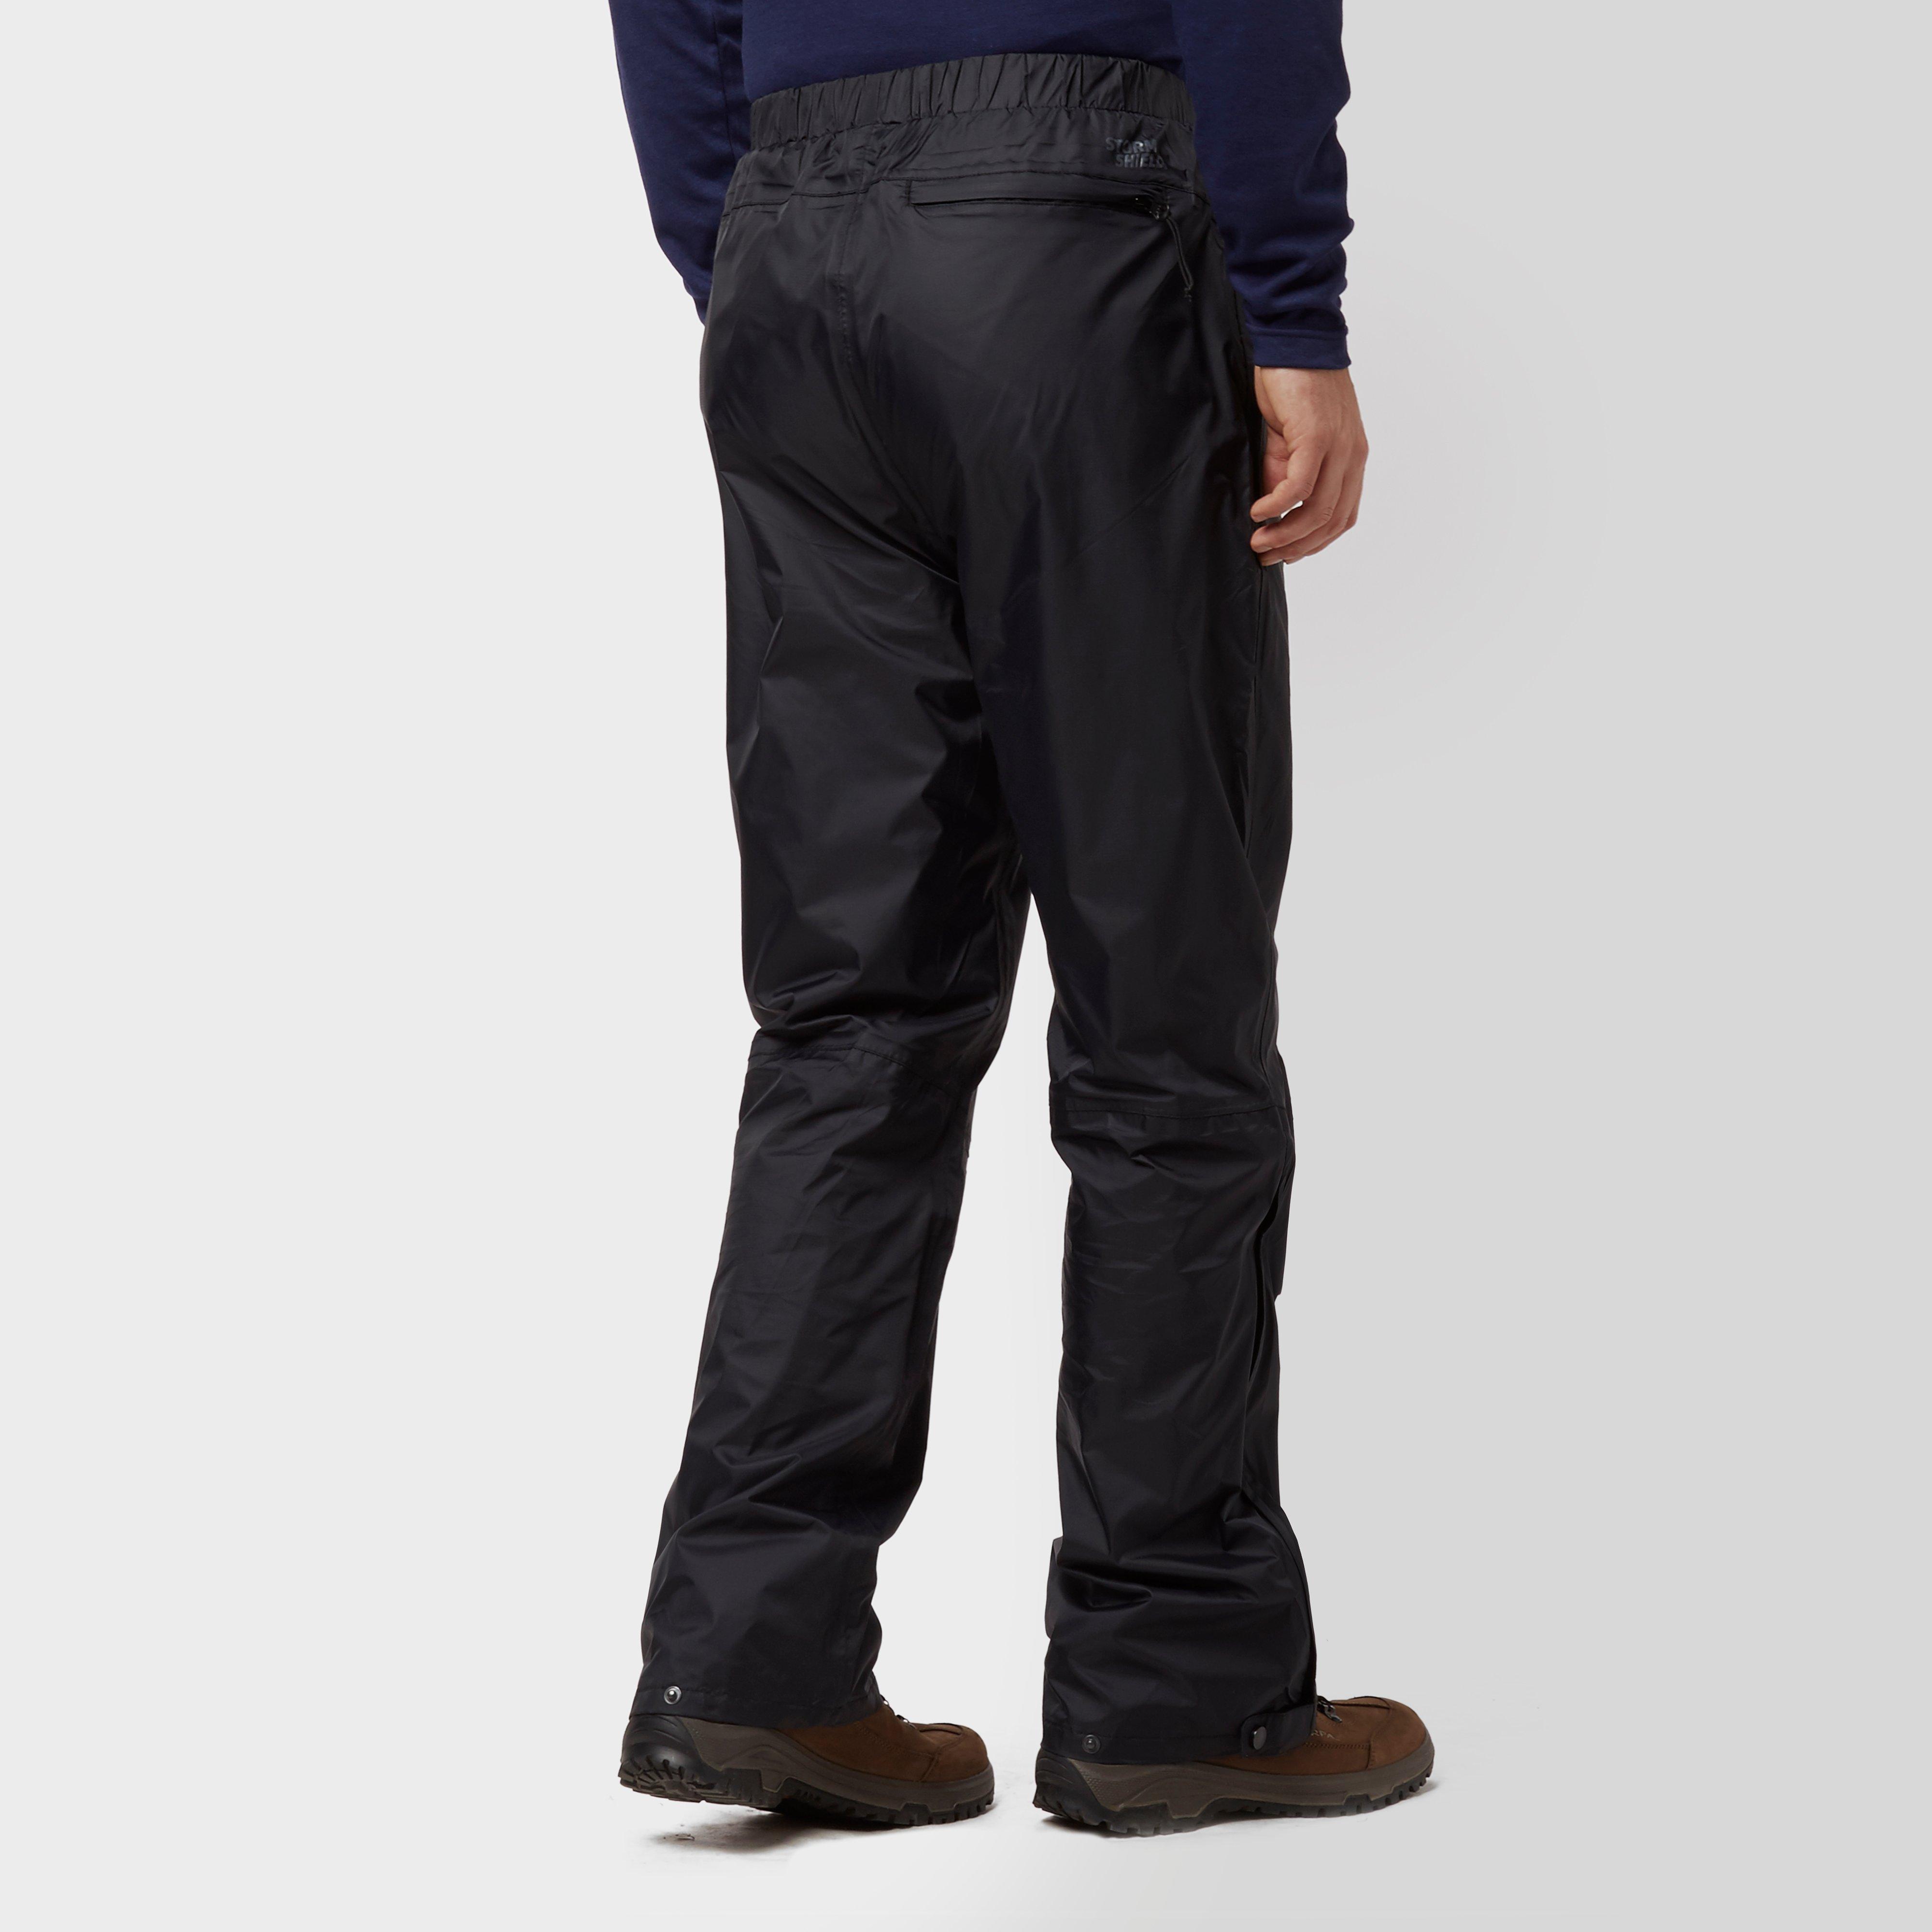 Peter Storm Men's Waterproof Overtrousers Review